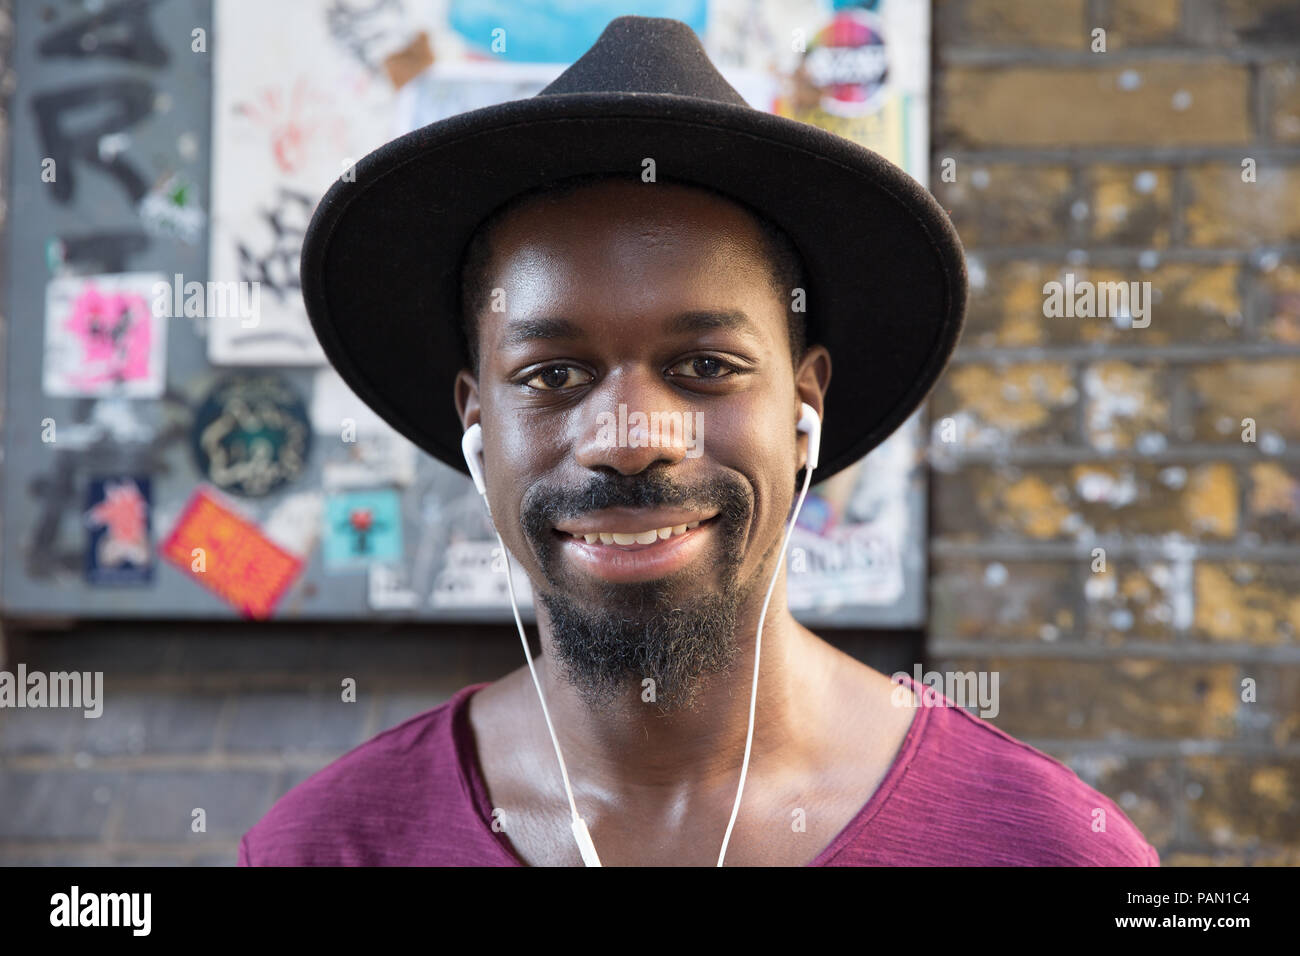 Cool, Hip, hipster, black man wearing a wide brimmed hat and white ear phones in front of a brick wall on Brick lane in Shoreditch, London, UK. Stock Photo